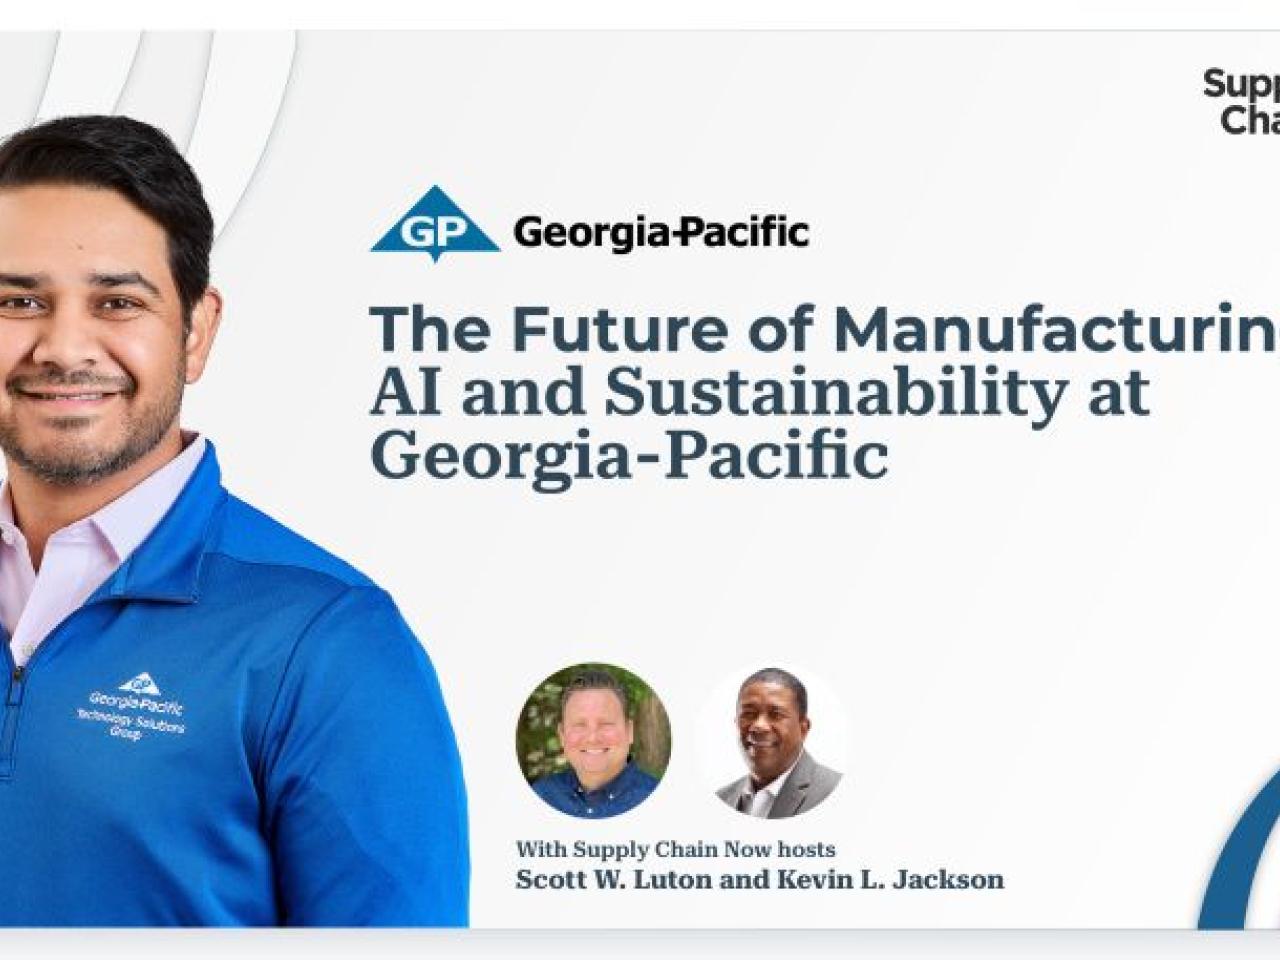 "The Future of Manufacturing: AI and Sustainability at Georgia Pacific" with podcast member's headshots